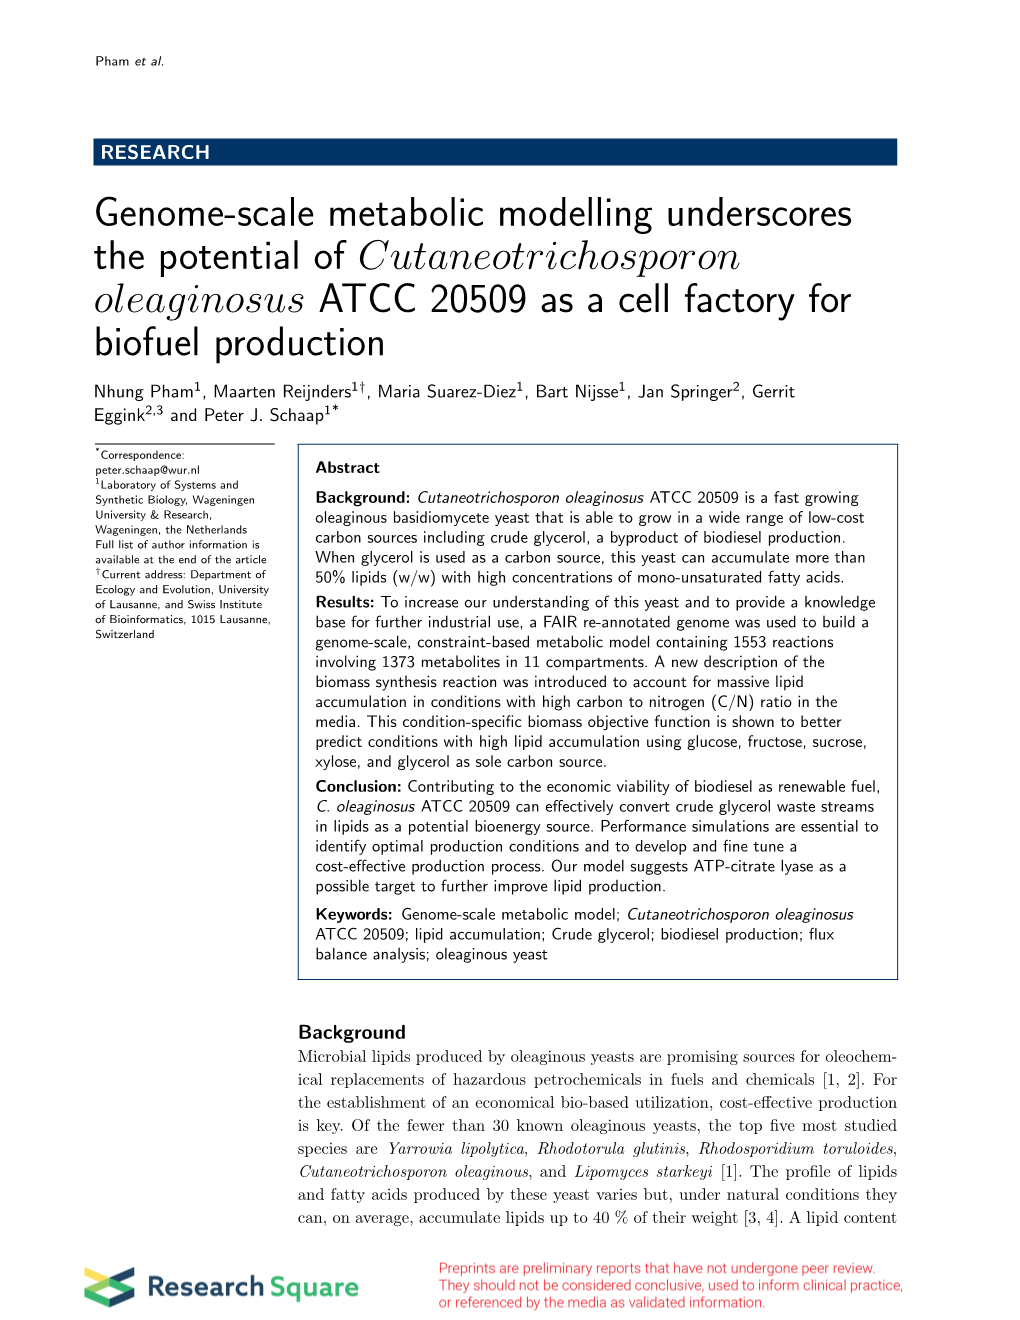 Genome-Scale Metabolic Modelling Underscores the Potential of Cutaneotrichosporon Oleaginosus ATCC 20509 As a Cell Factory for Biofuel Production